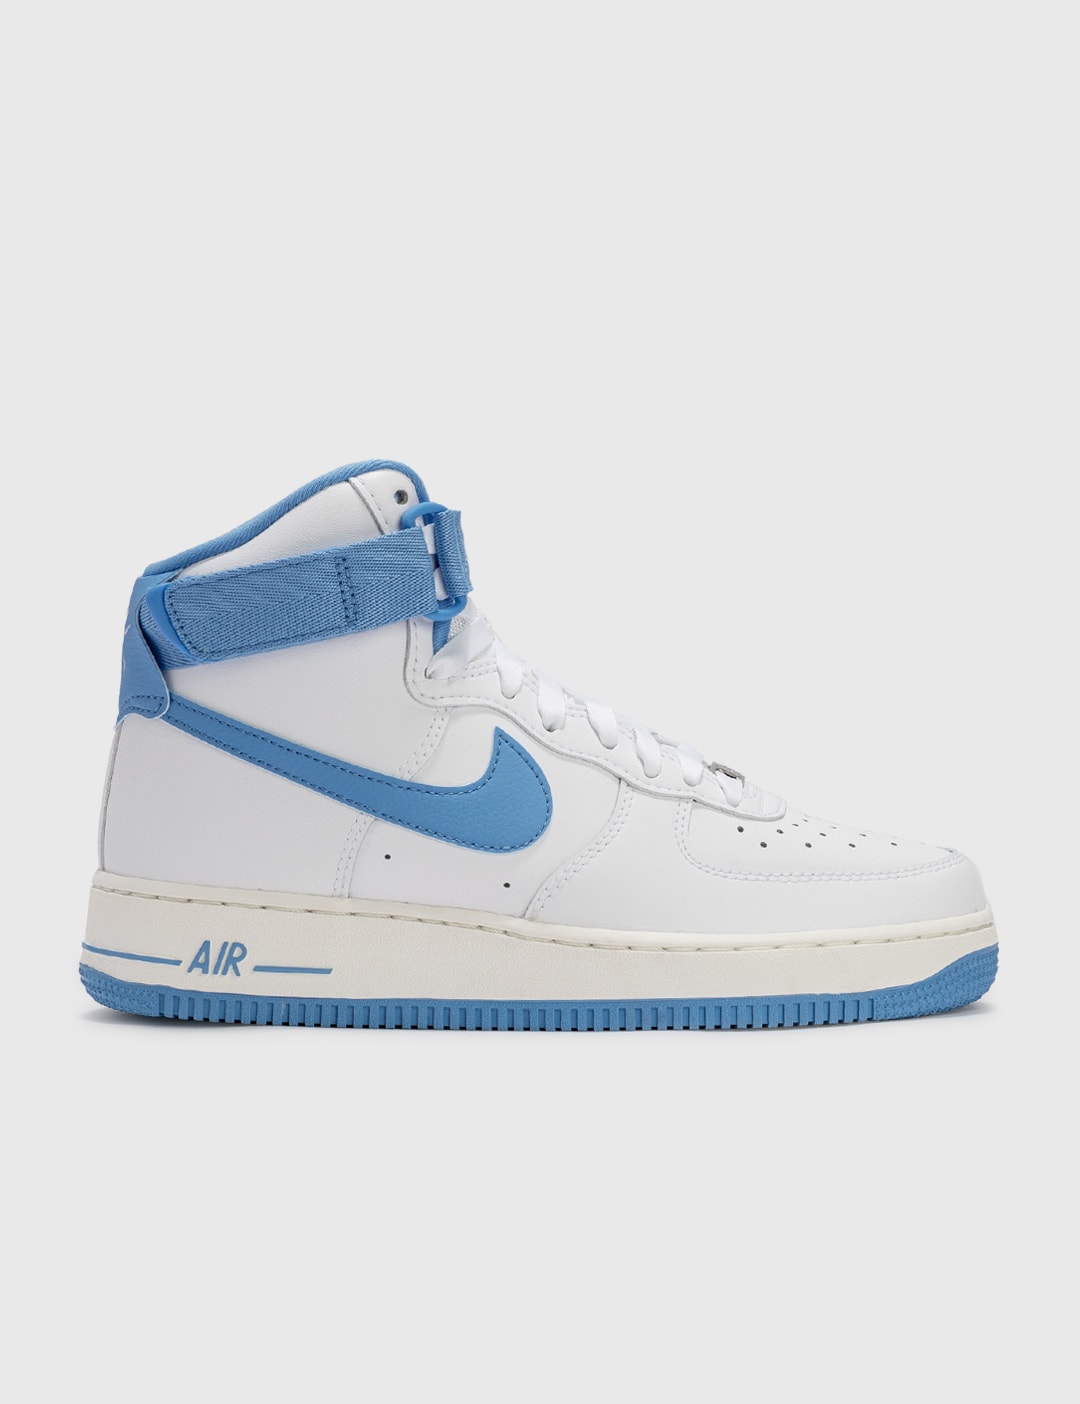 Nike - AIR FORCE 1 MID PRM  HBX - Globally Curated Fashion and